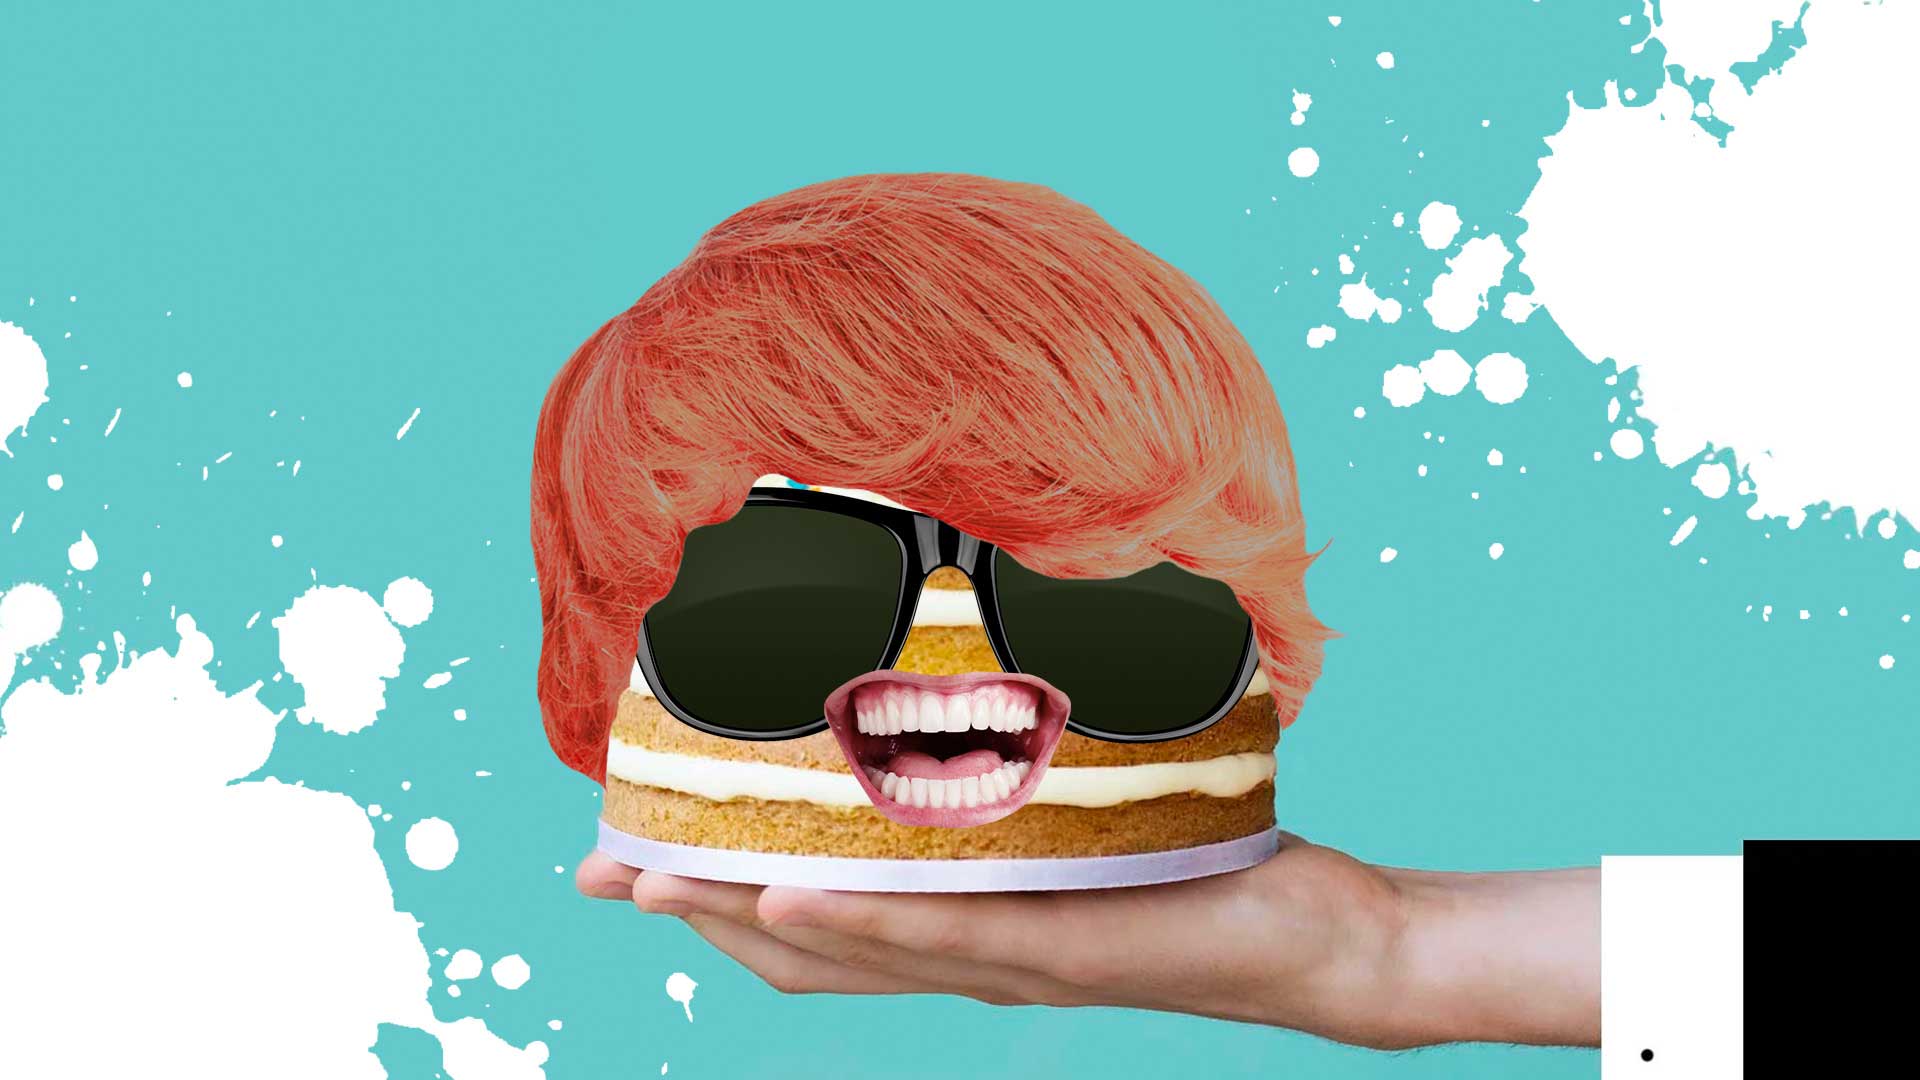 A person holding a cake wearing a wig